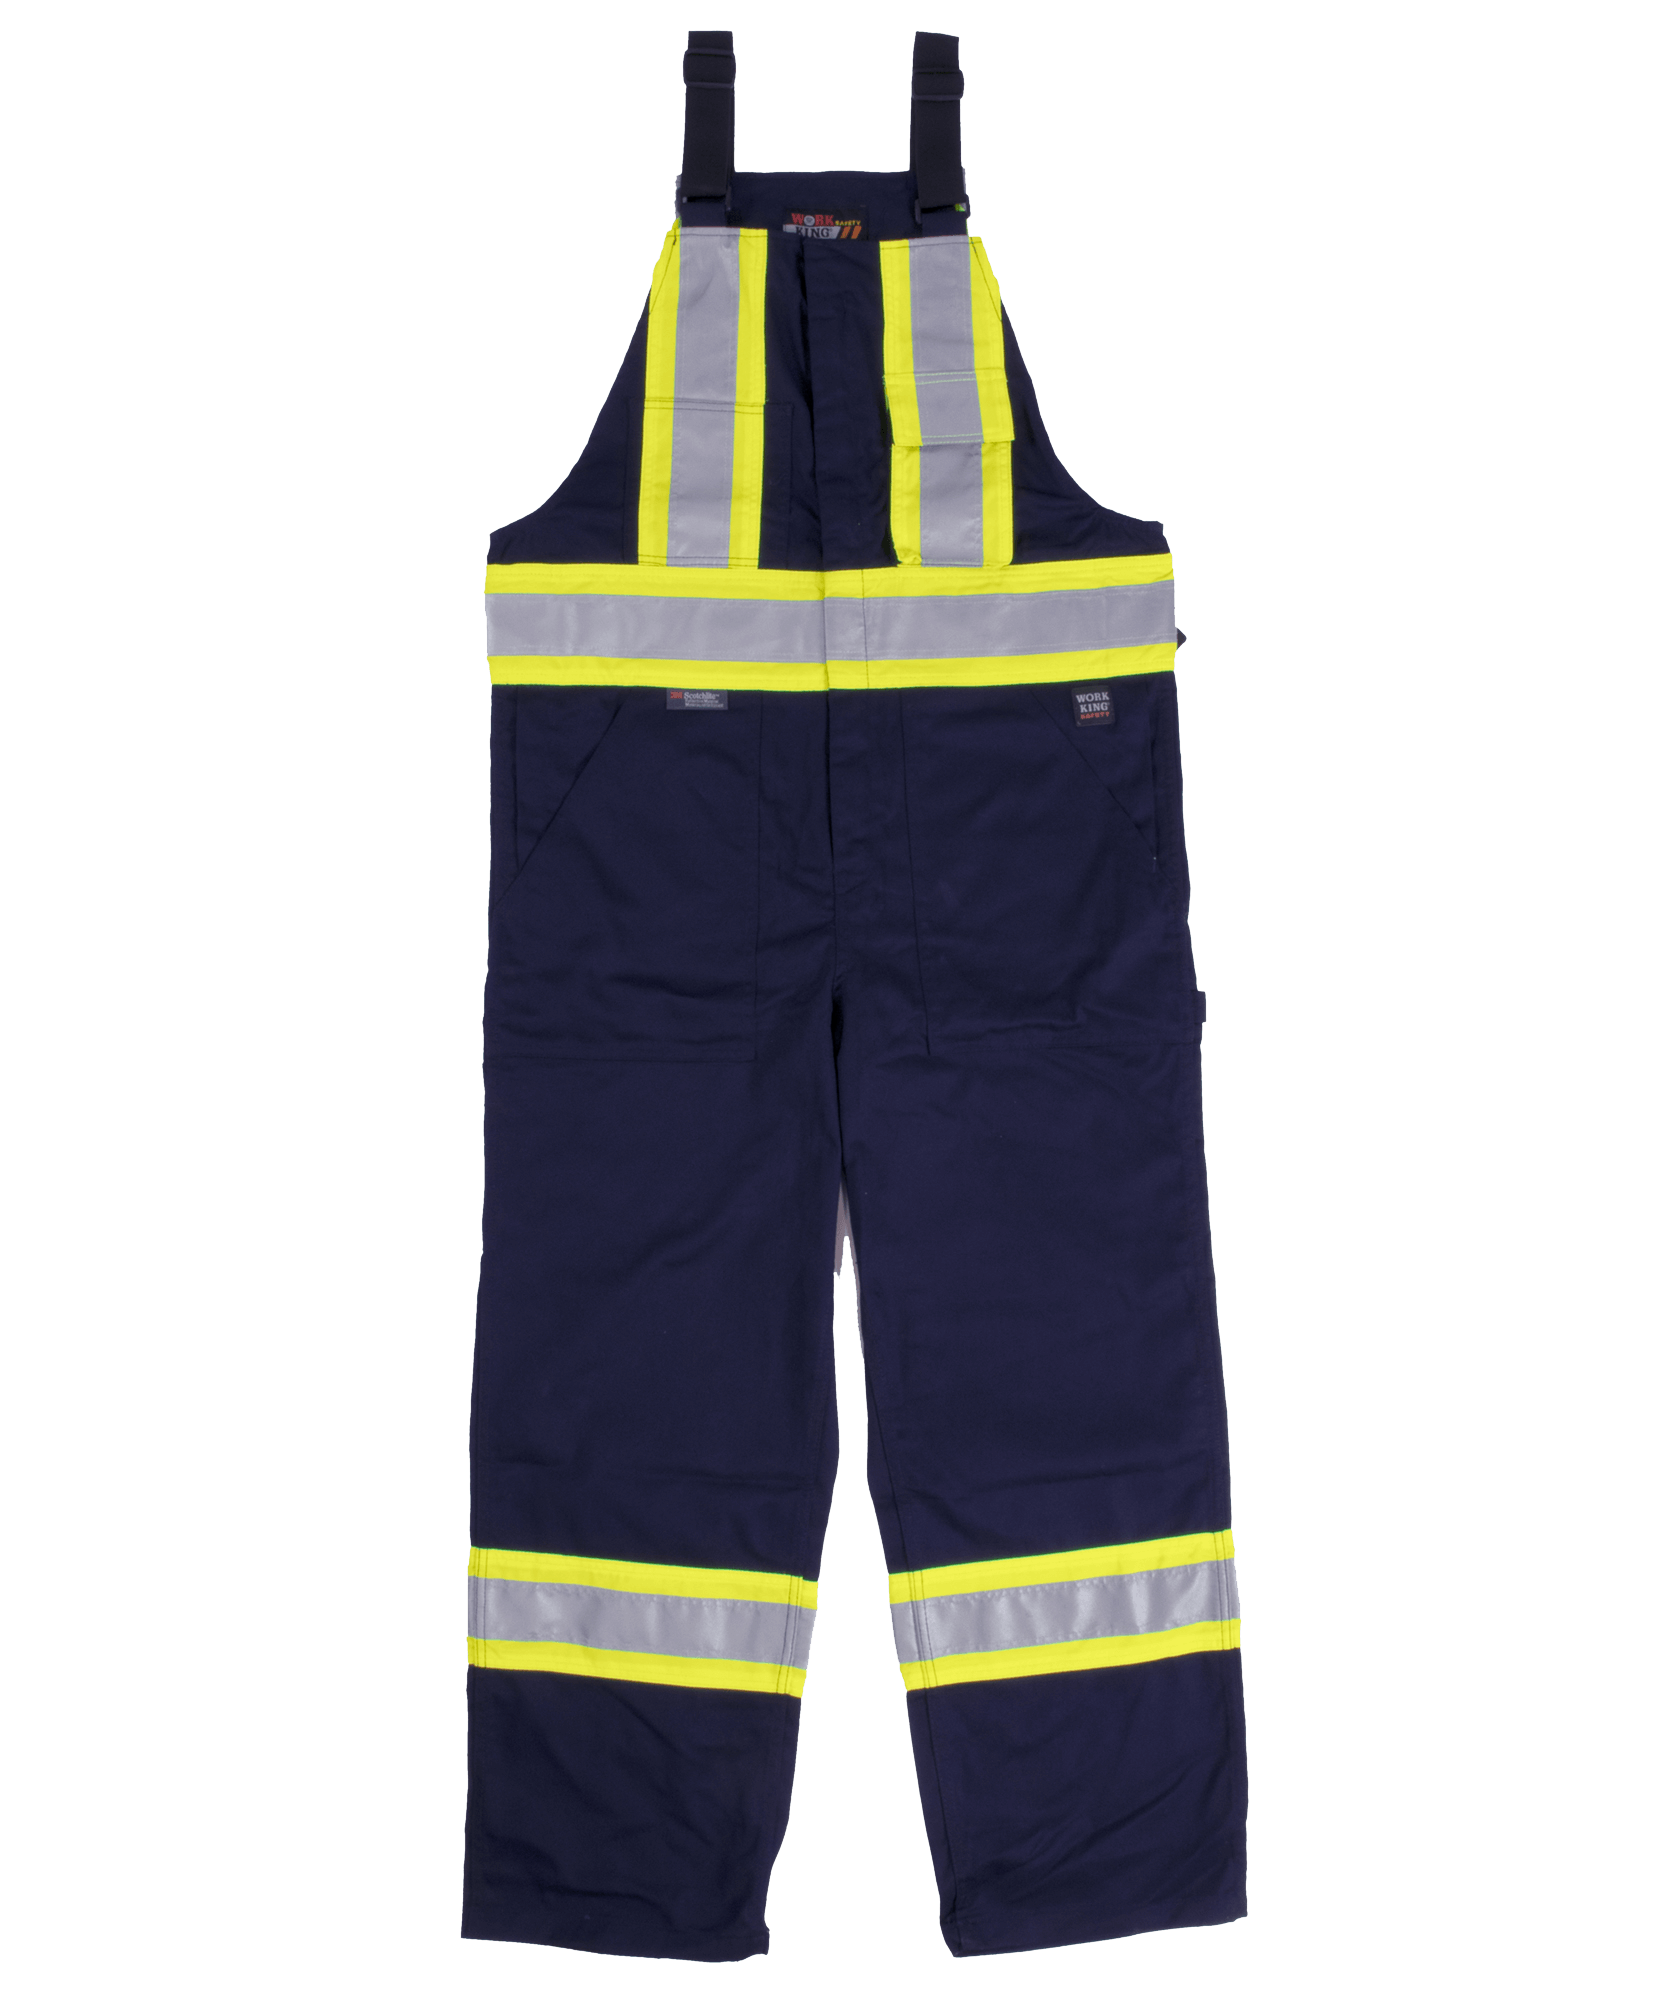 Tough Duck Unlined Safety Bib Overall - Weaver and Devore Trading Ltd